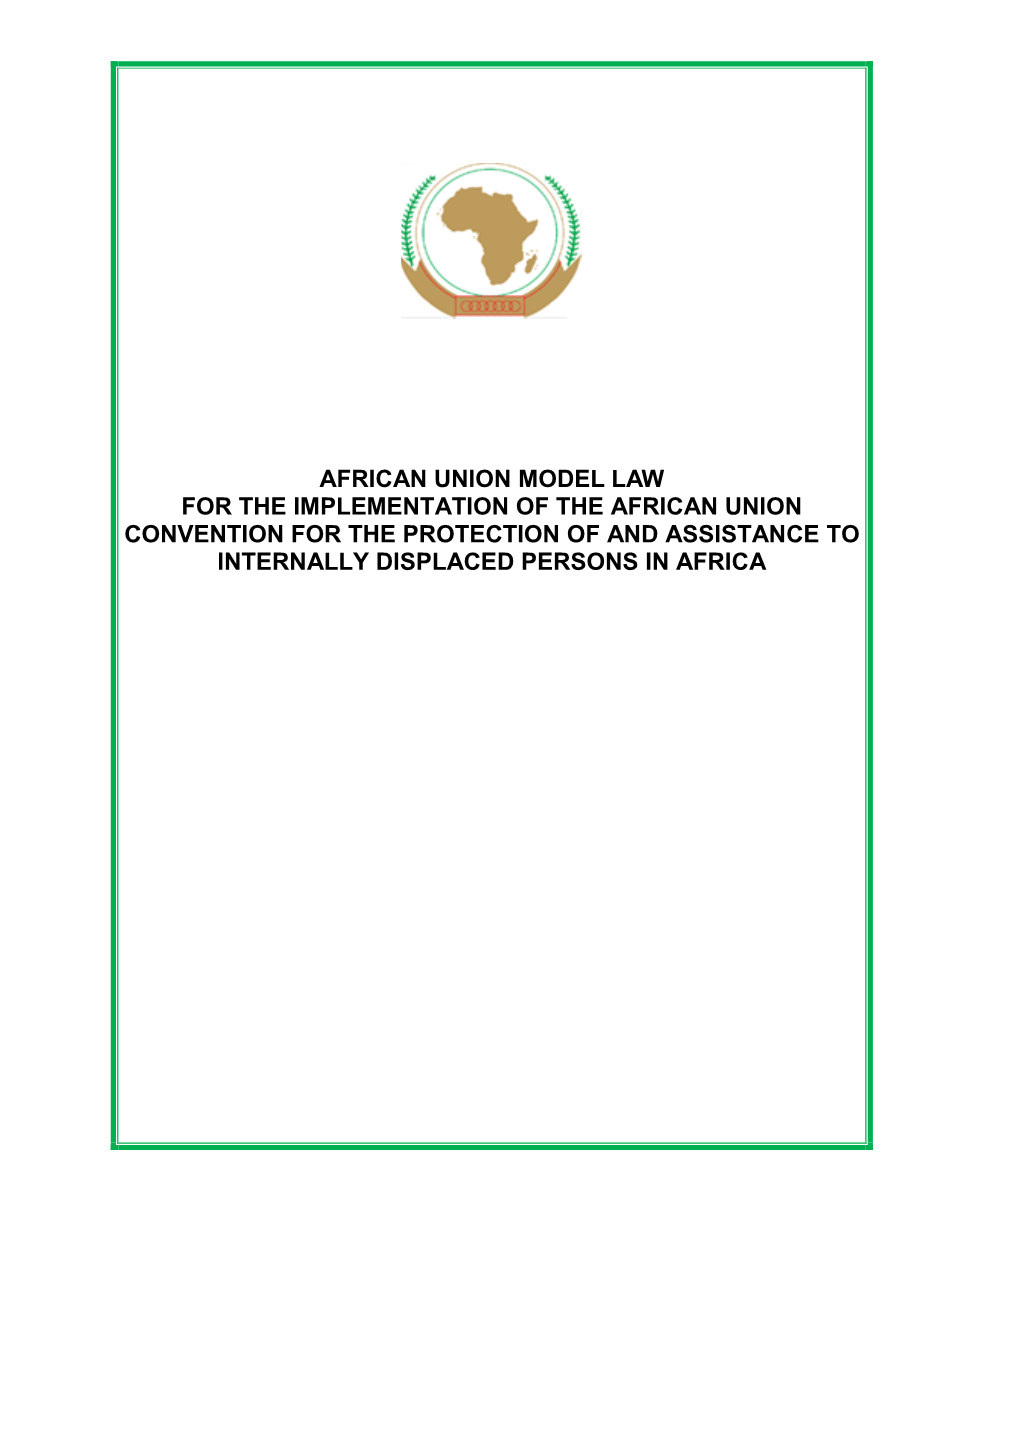 Model Law for the Implementation of the African Union Convention for the Protection of and Assistance to Internally Displaced Persons in Africa